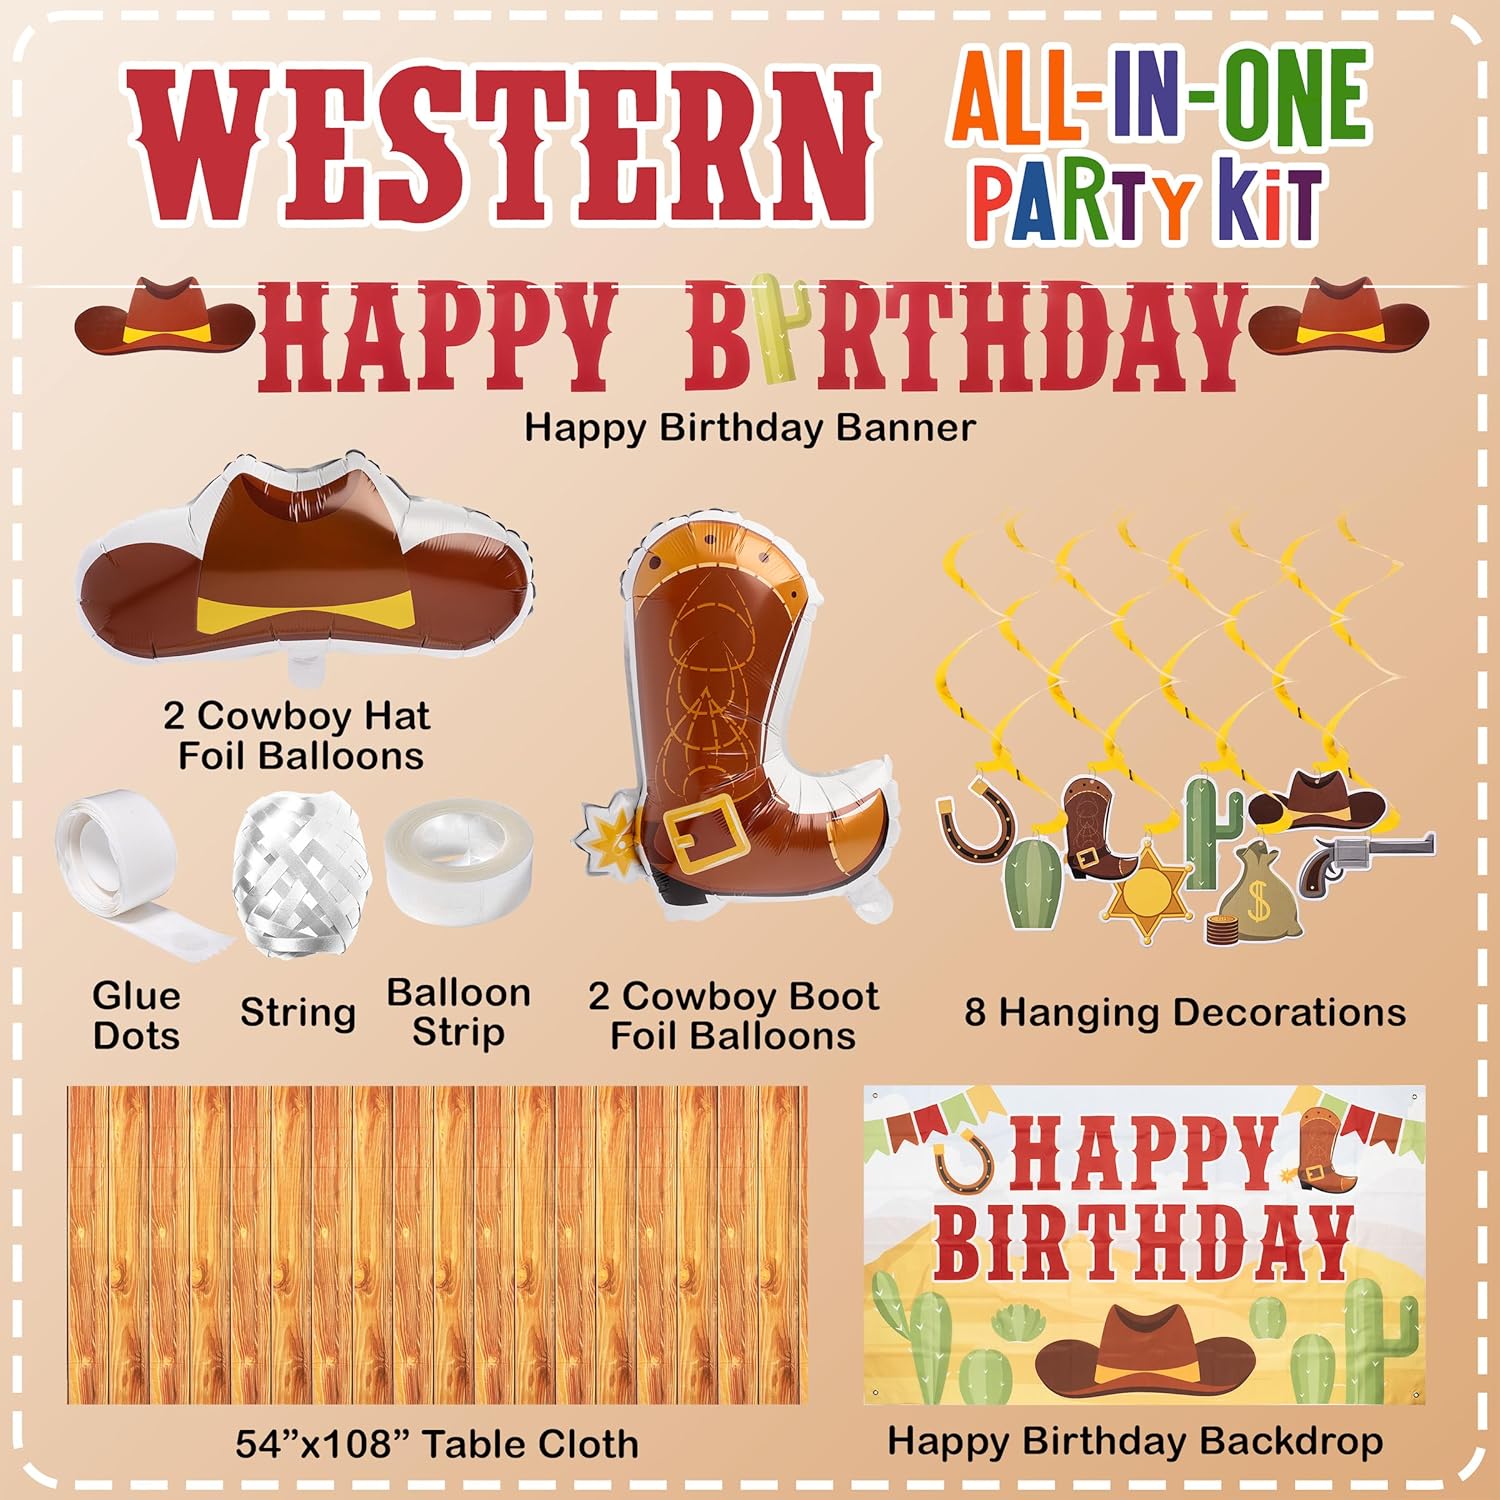 All-in-One 357 Pc Western Party Decorations (Serves 24) Rodeo Party Supplies with Plates, Cups, Napkins, Tablecloth, Balloons, Cake and Cupcake Topper and More Cowboy Birthday Decorations